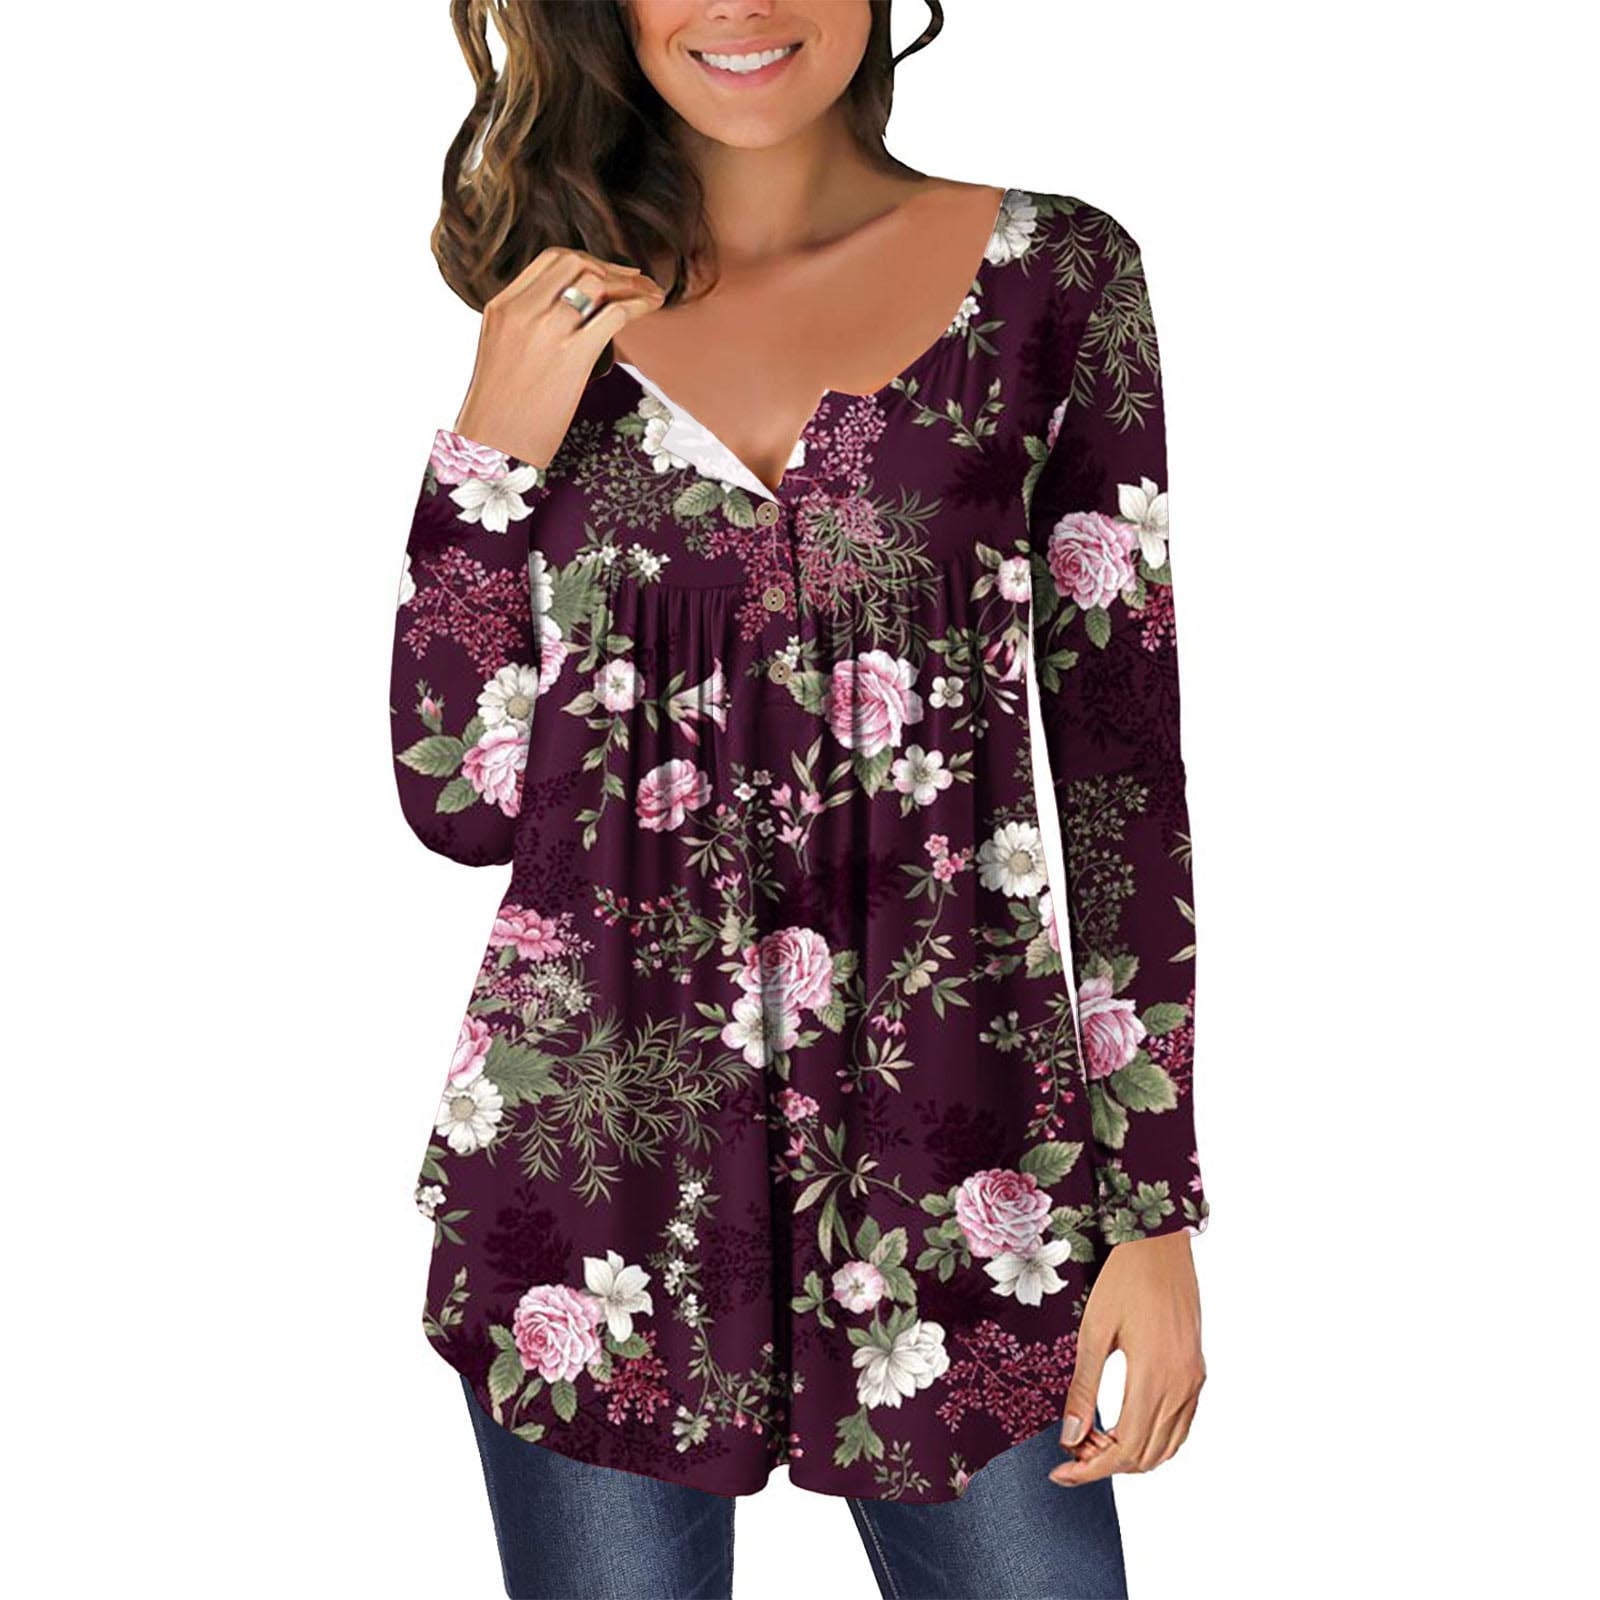 Tunic Tops to Wear with Leggings Dressy Plus Size Tops for Women Comfy  Flowy Pleated Long Shirt Henley Floral Printing Long Sleeve Shirts Black M